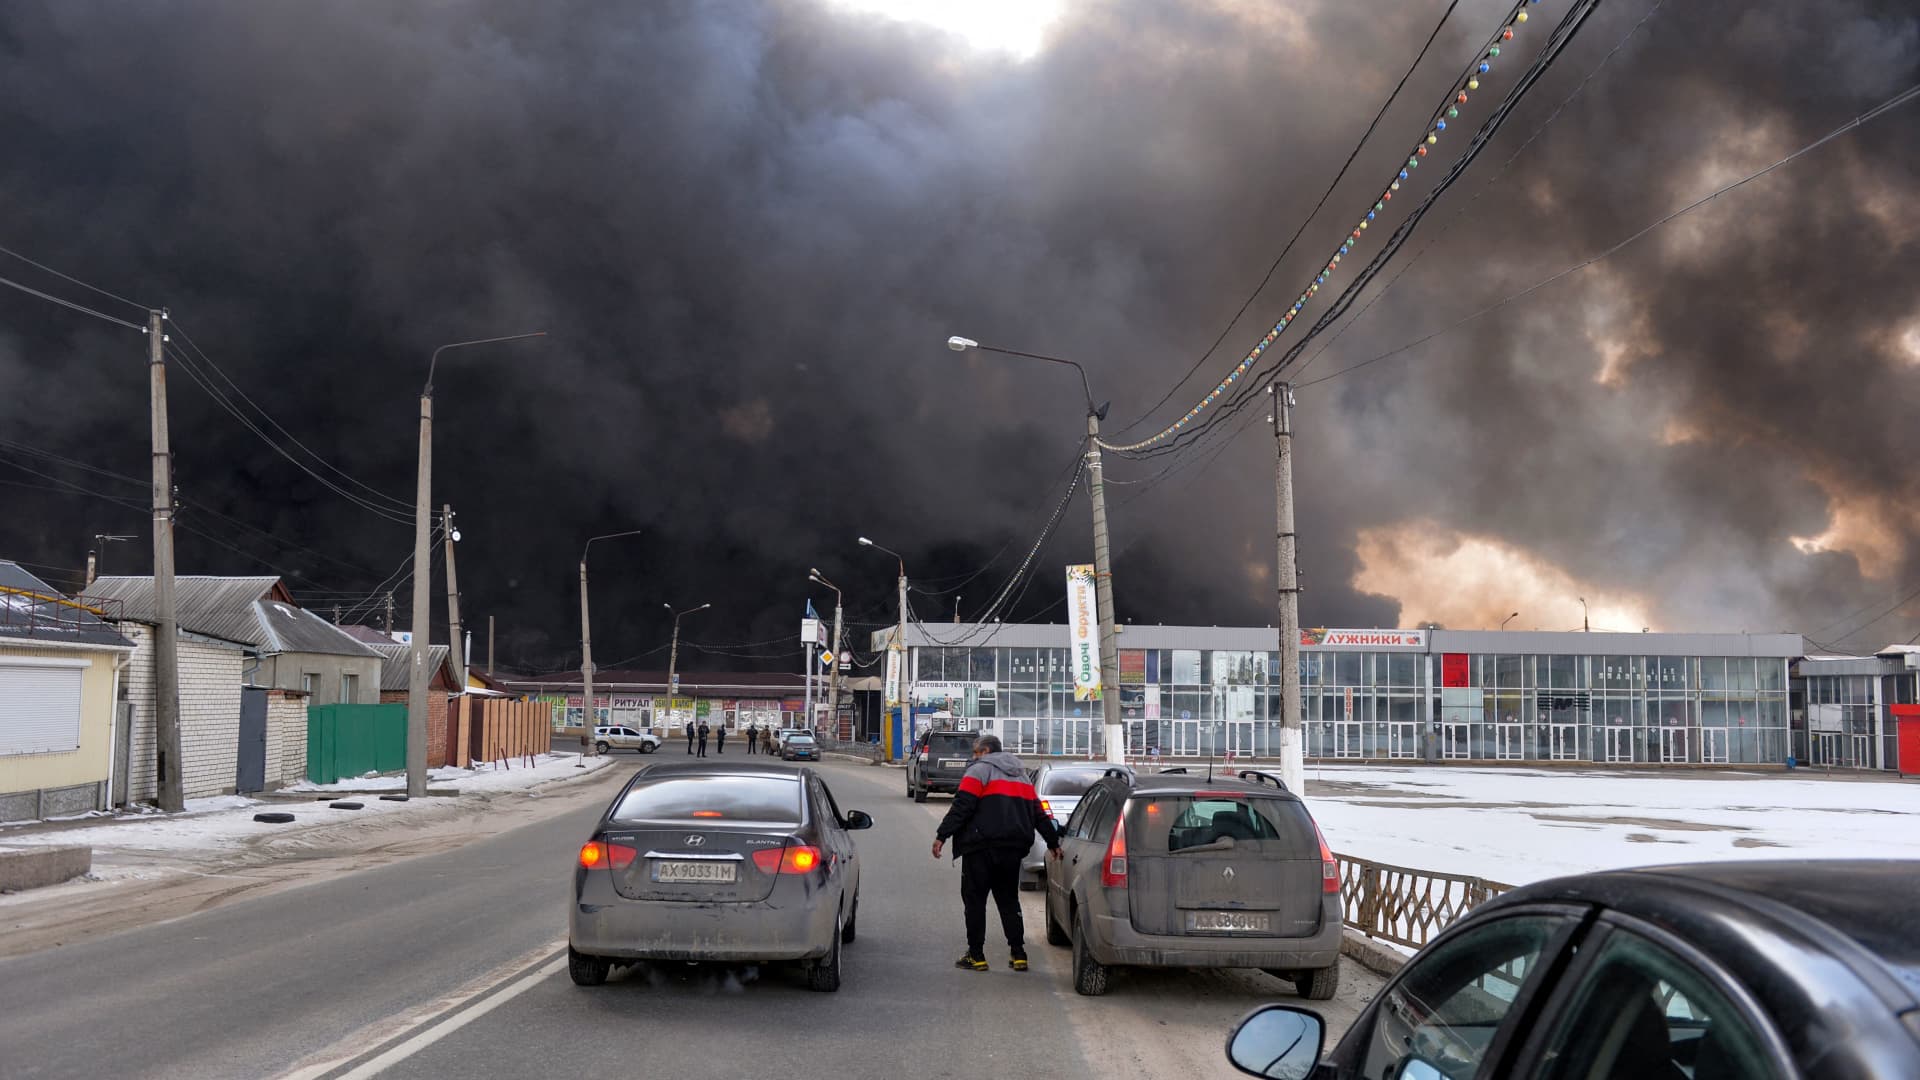 Black smoke rises into the sky from the Barabashovo market - one of the largest markets in the eastern Europe covering an area of more than 75 hectares - which was reportedly hit by shelling, in Kharkiv on March 17, 2022, amid the ongoing Russia's invasion of Ukraine.